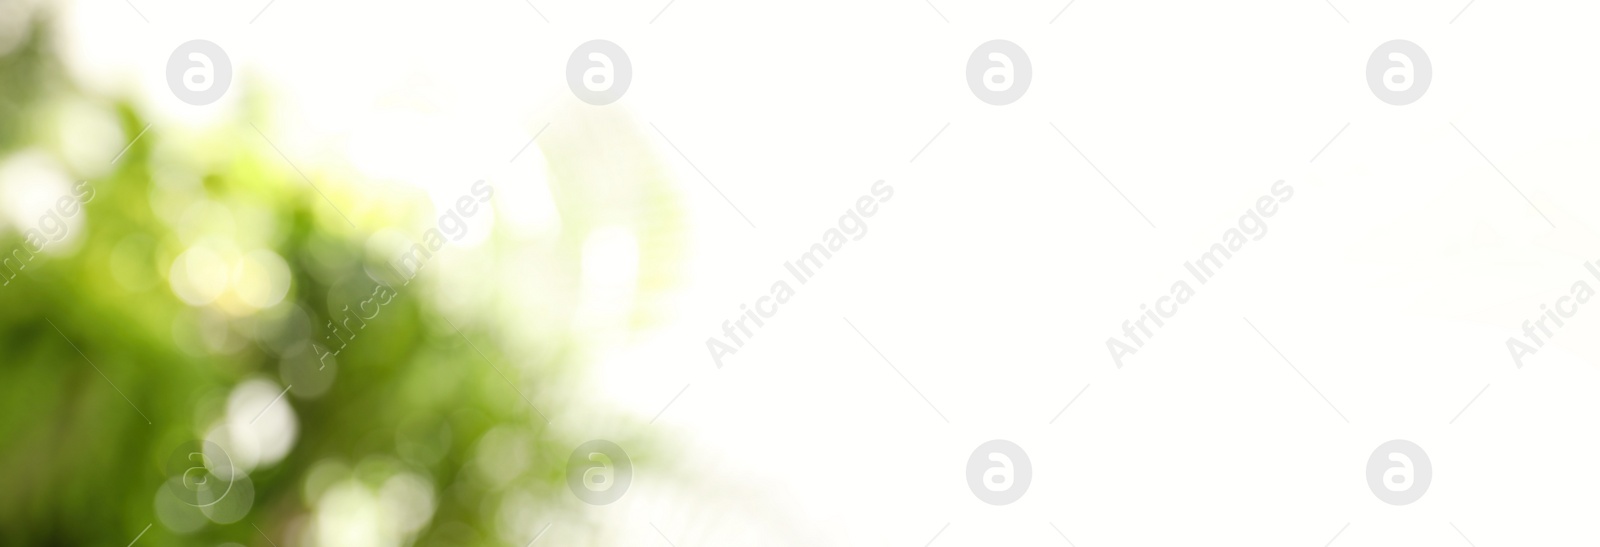 Image of Blurred view of abstract green background, bokeh effect. Springtime